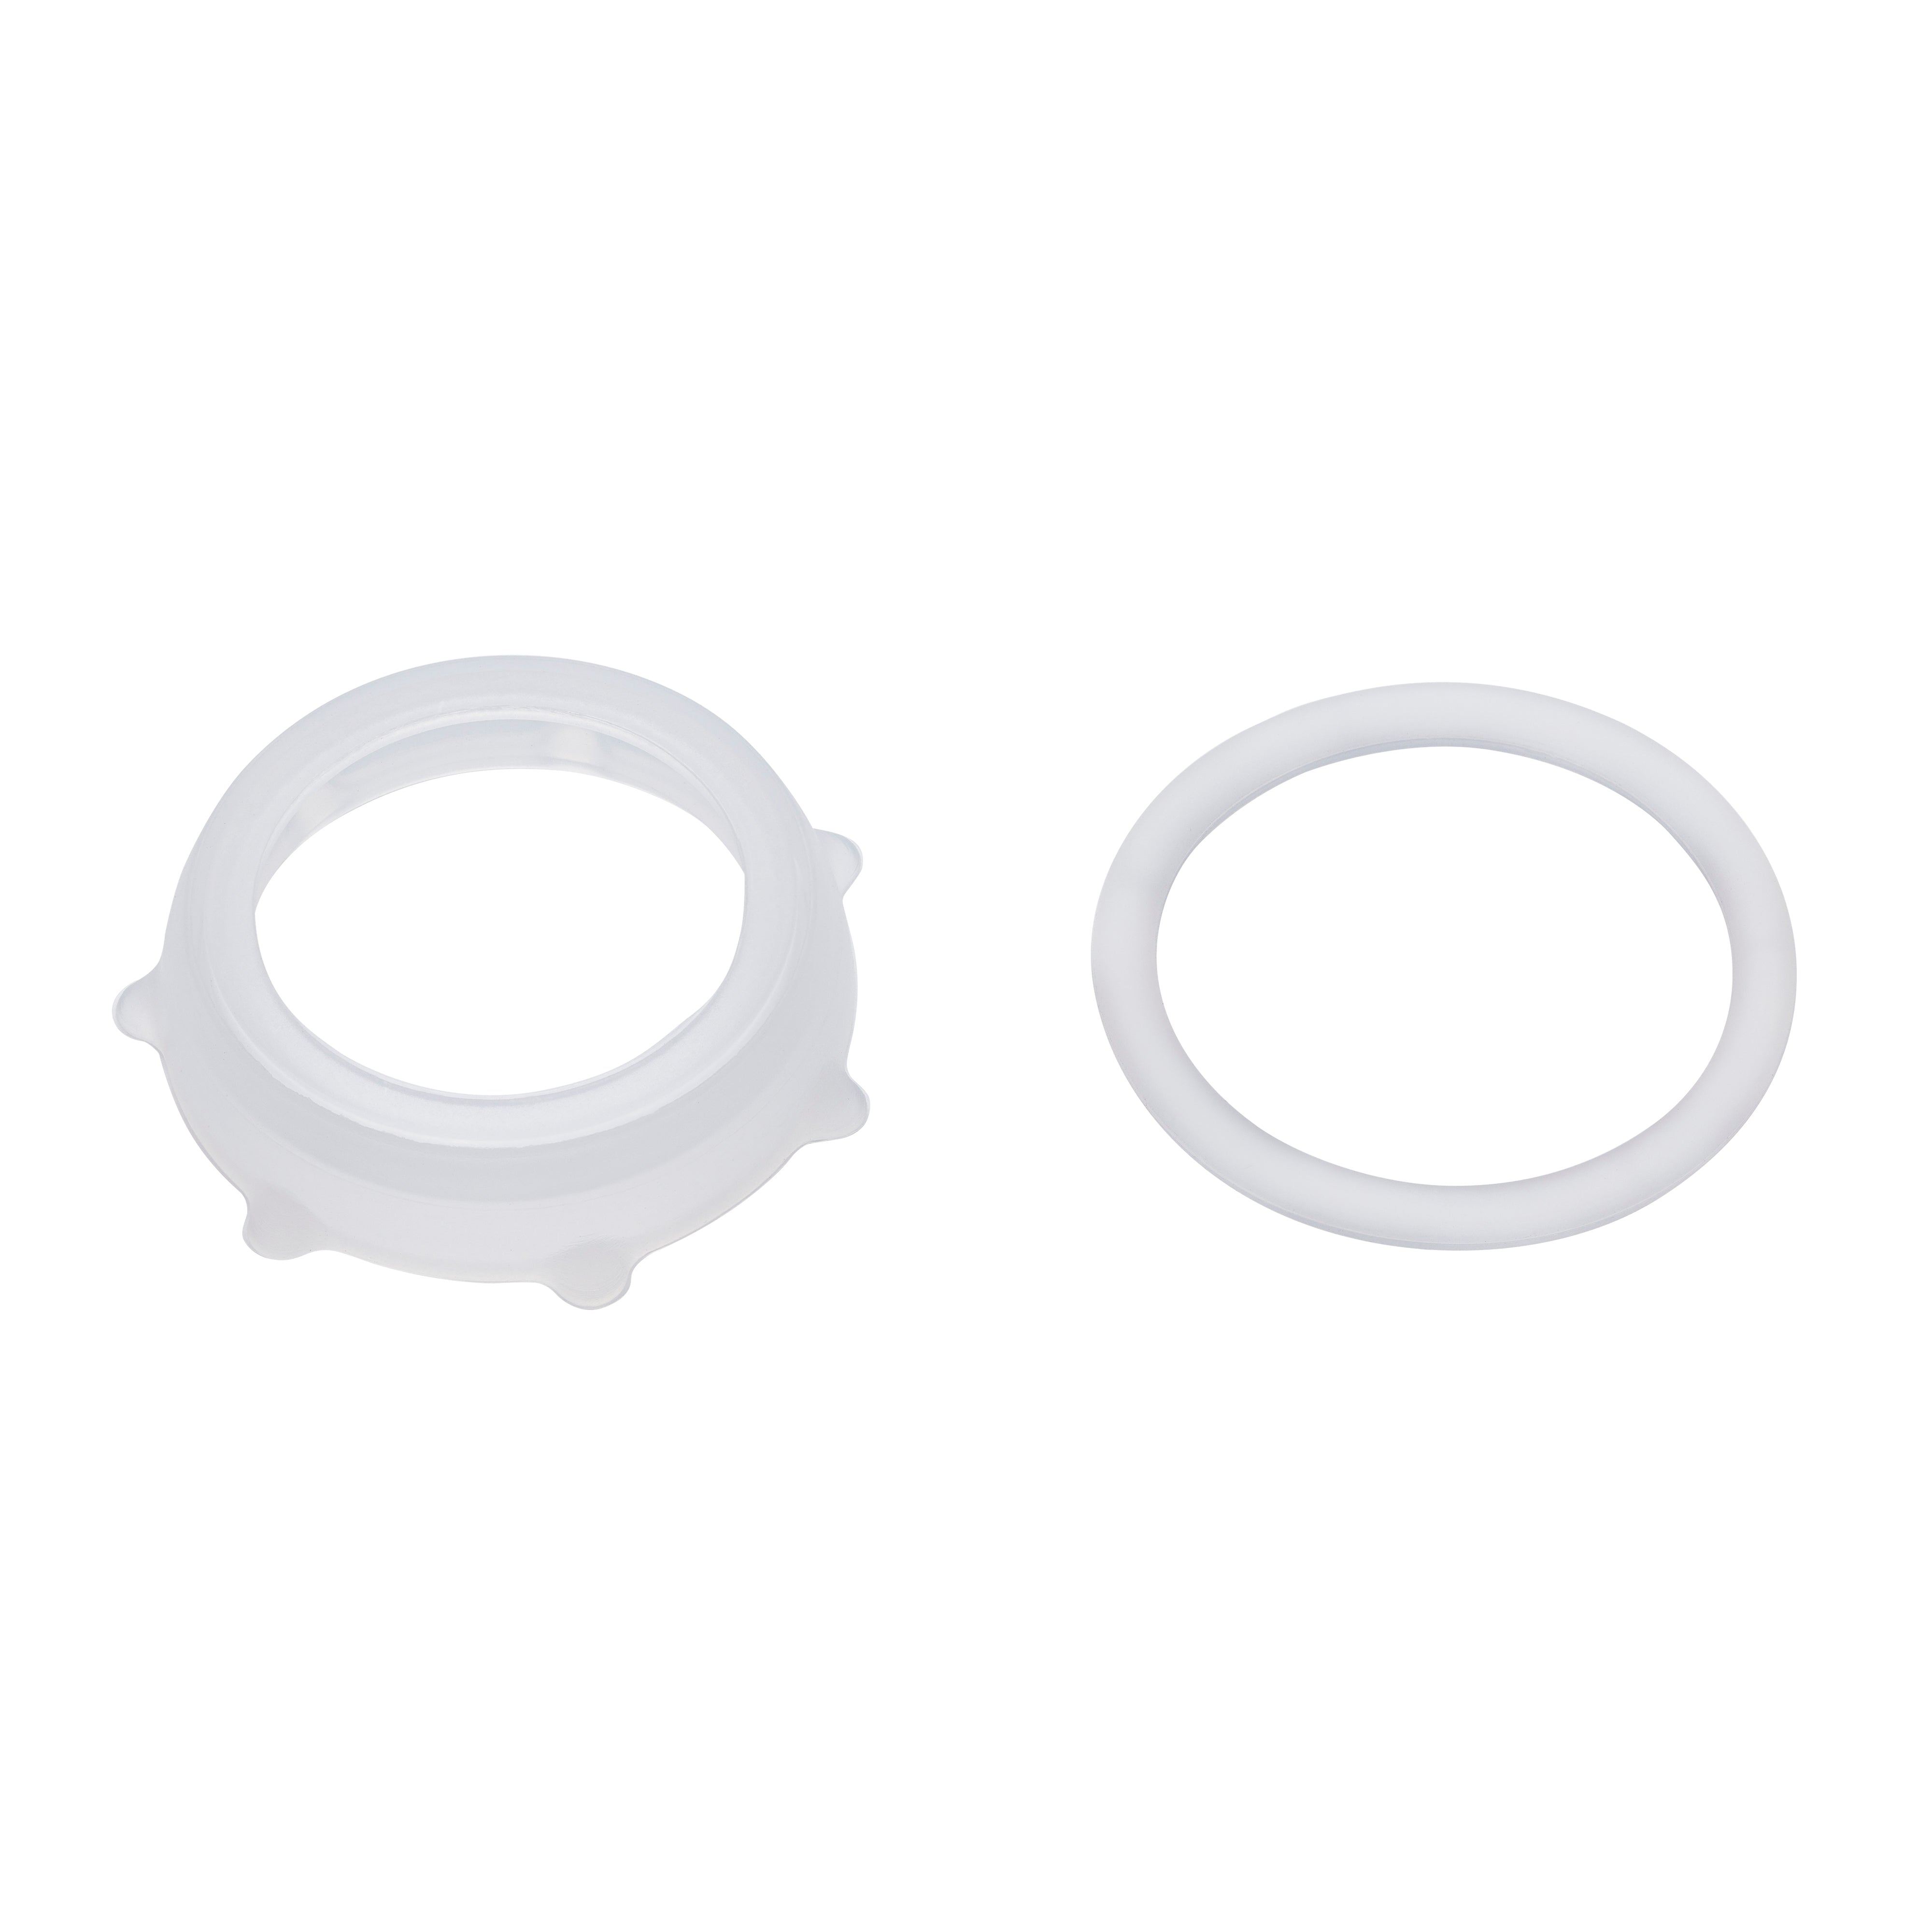 10 Pack Replacement Silicone Sealing Rings Gaskets for Insulated